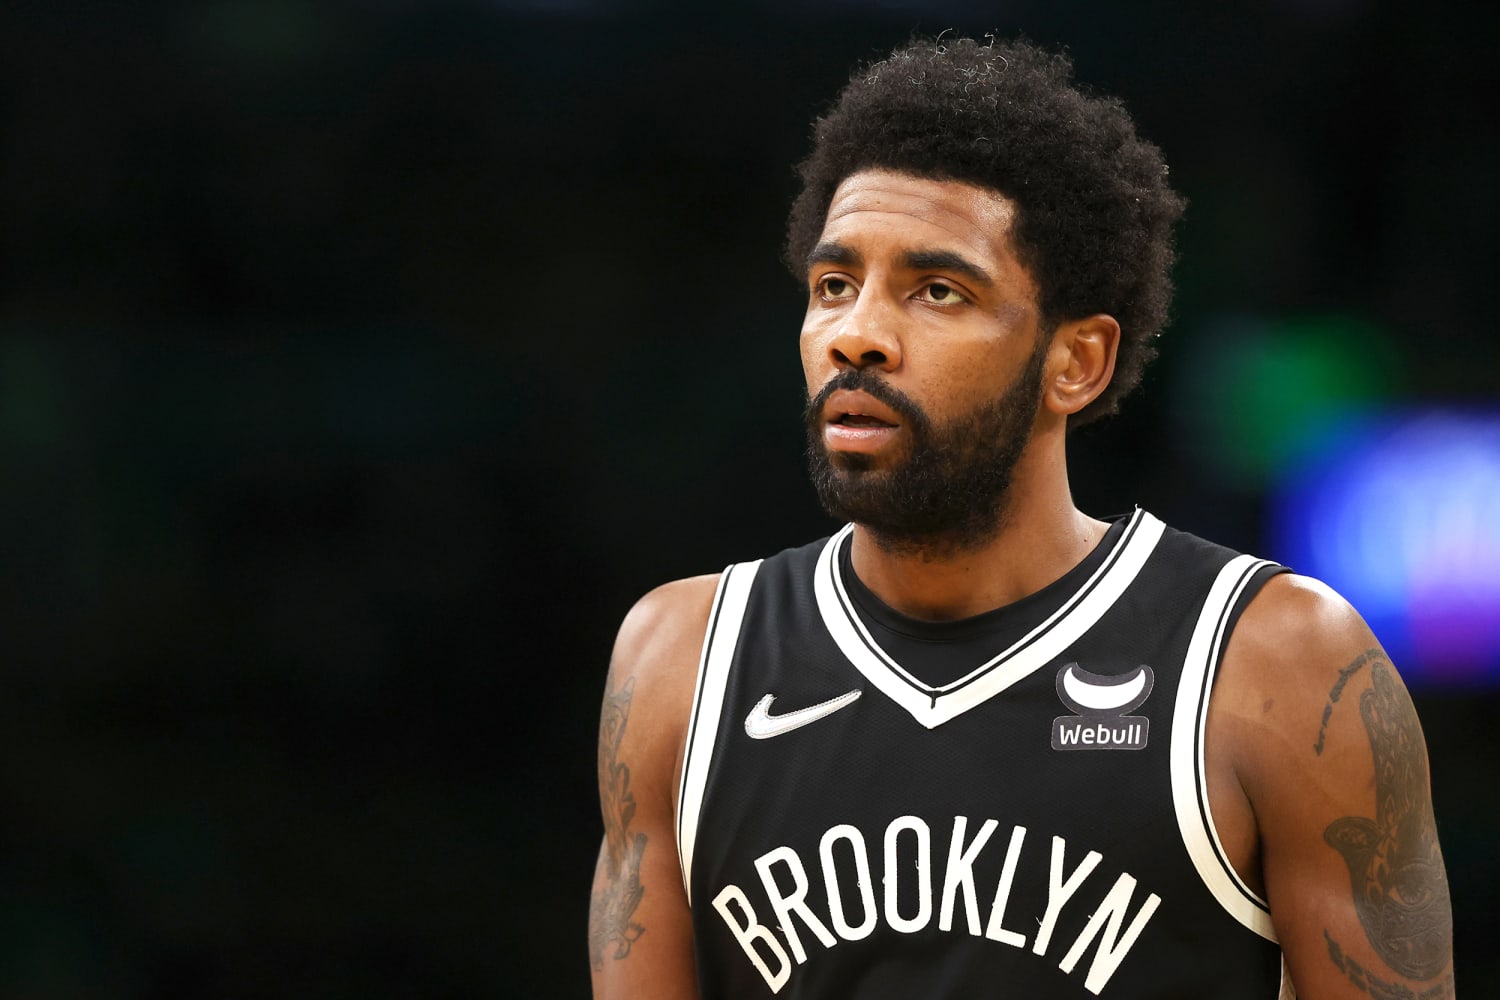 NBA's Kyrie Irving suspended for antisemitic social media post